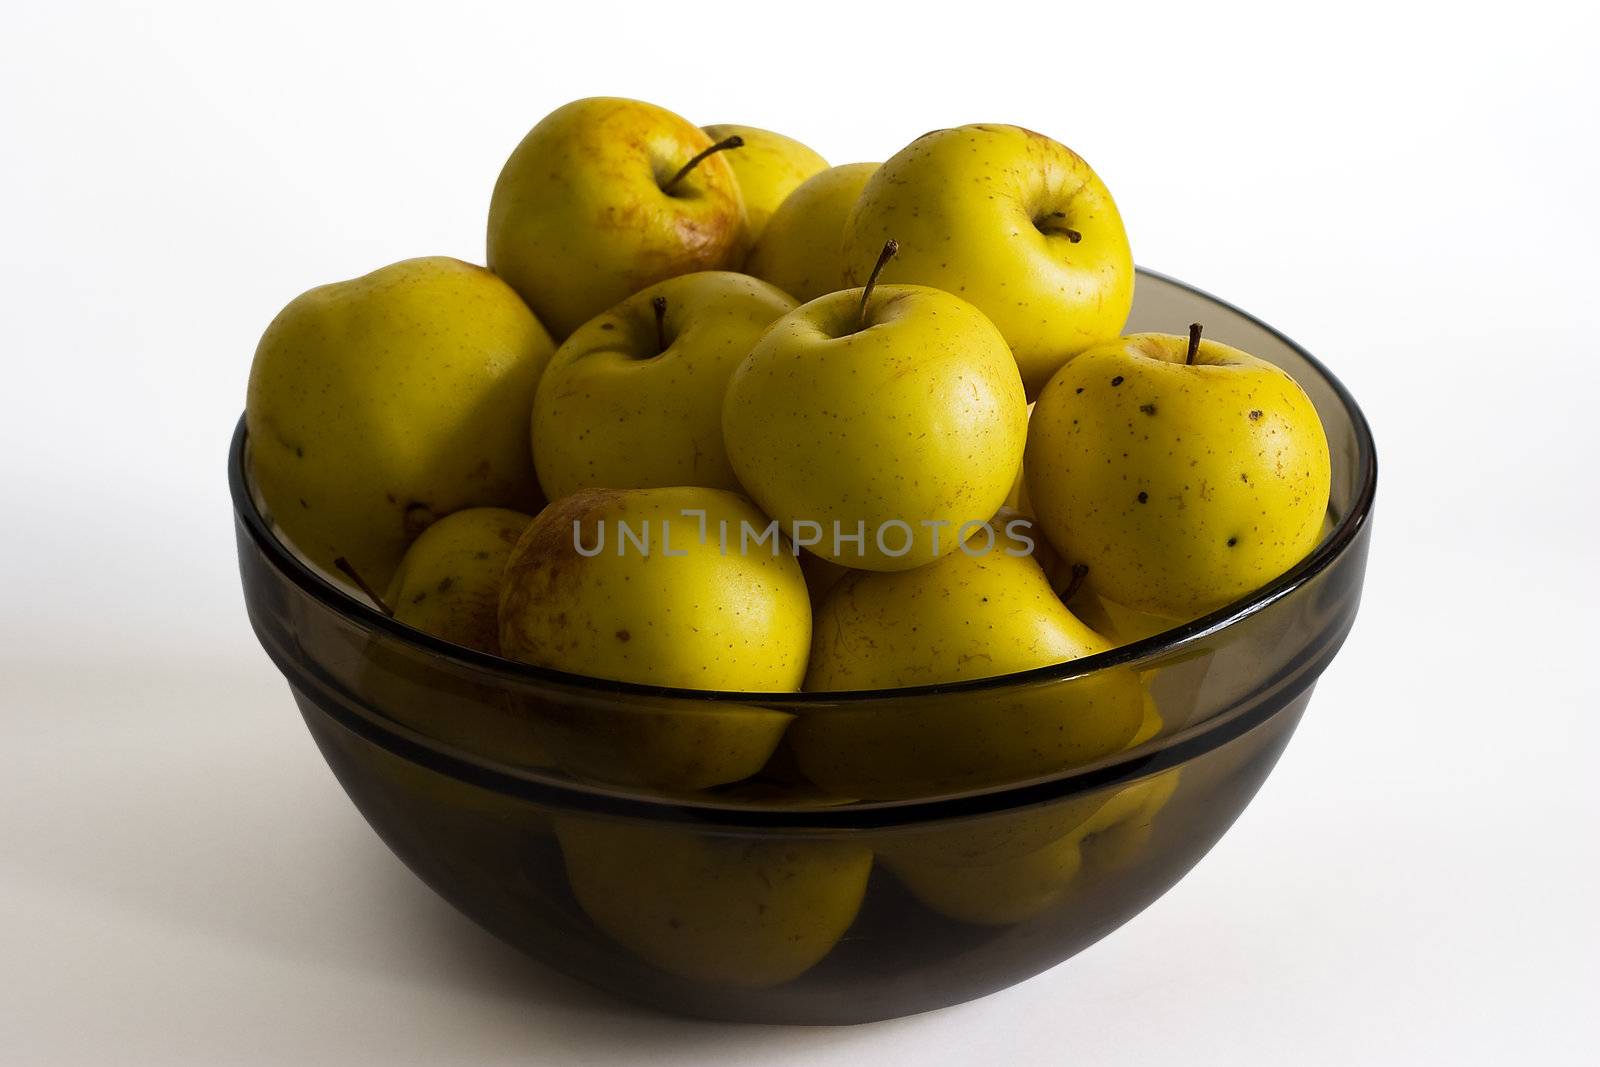 Ecological yellow apples in glass bowl on white background (clipping path included)